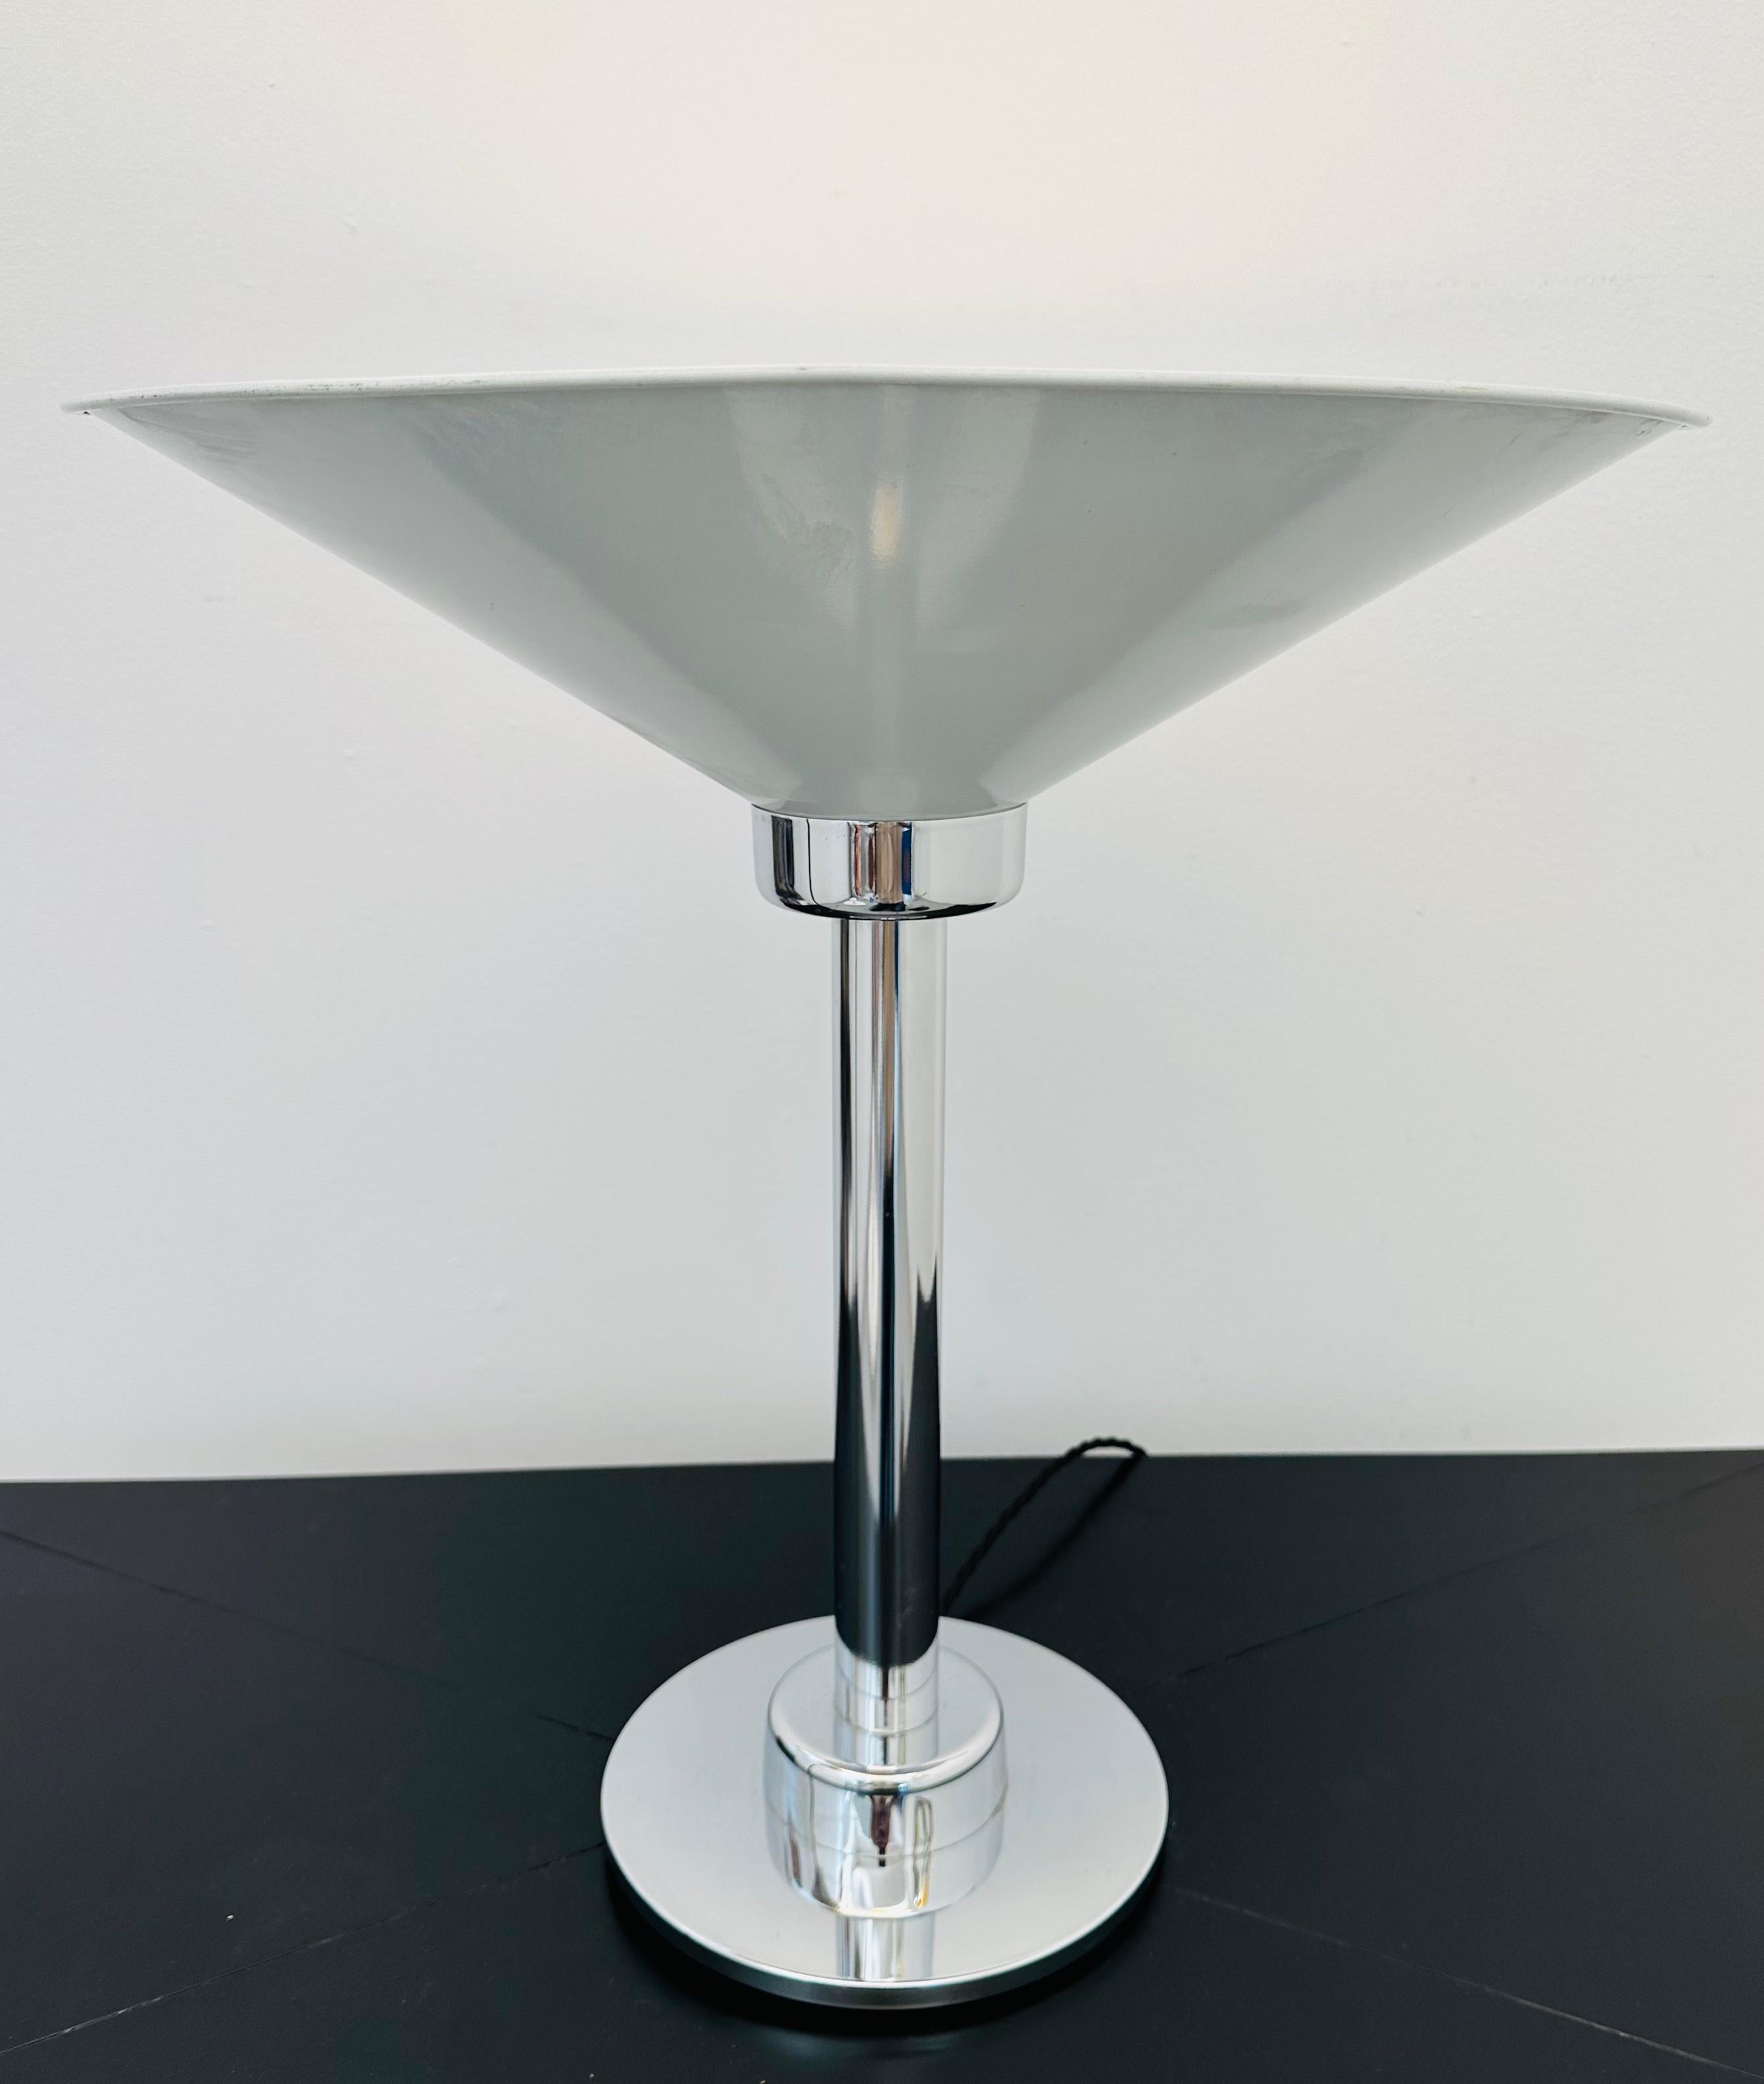 1970s Italian space age polished chrome and white enamelled metal conical uplighter table lamp.  Rewired by a professional electrician with a black silk flex.  In good vintage condition with some signs of wear around the edges of the cone.  The cone